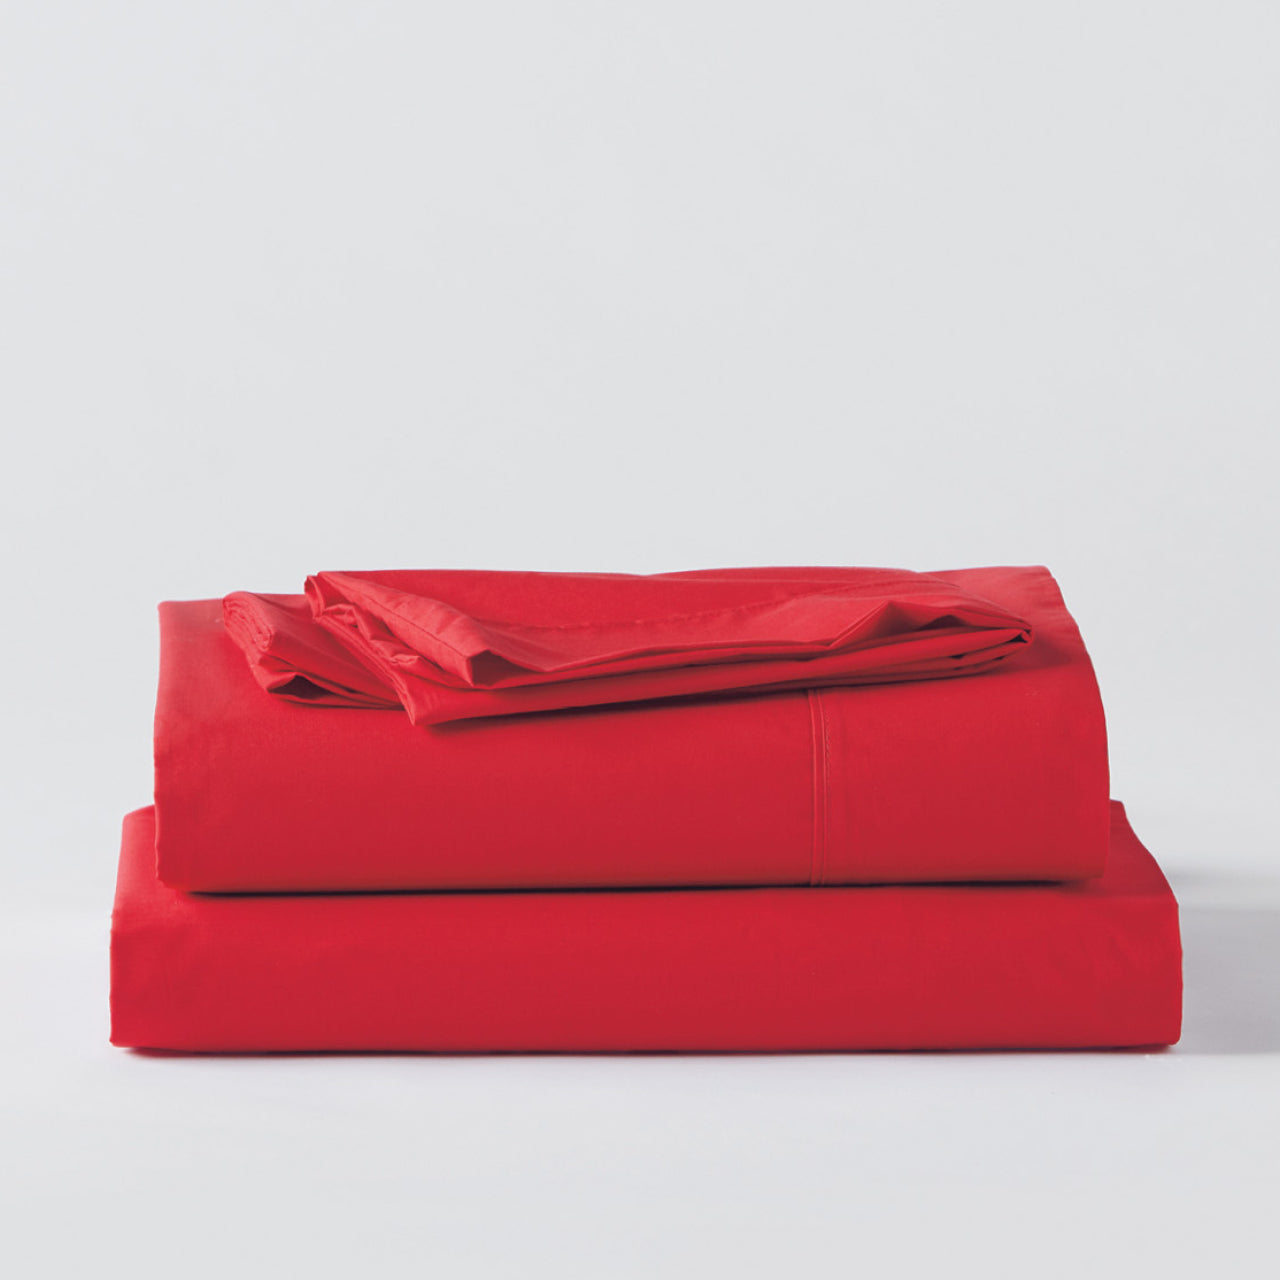 Premium Percale Flame Sheets folded up on floor